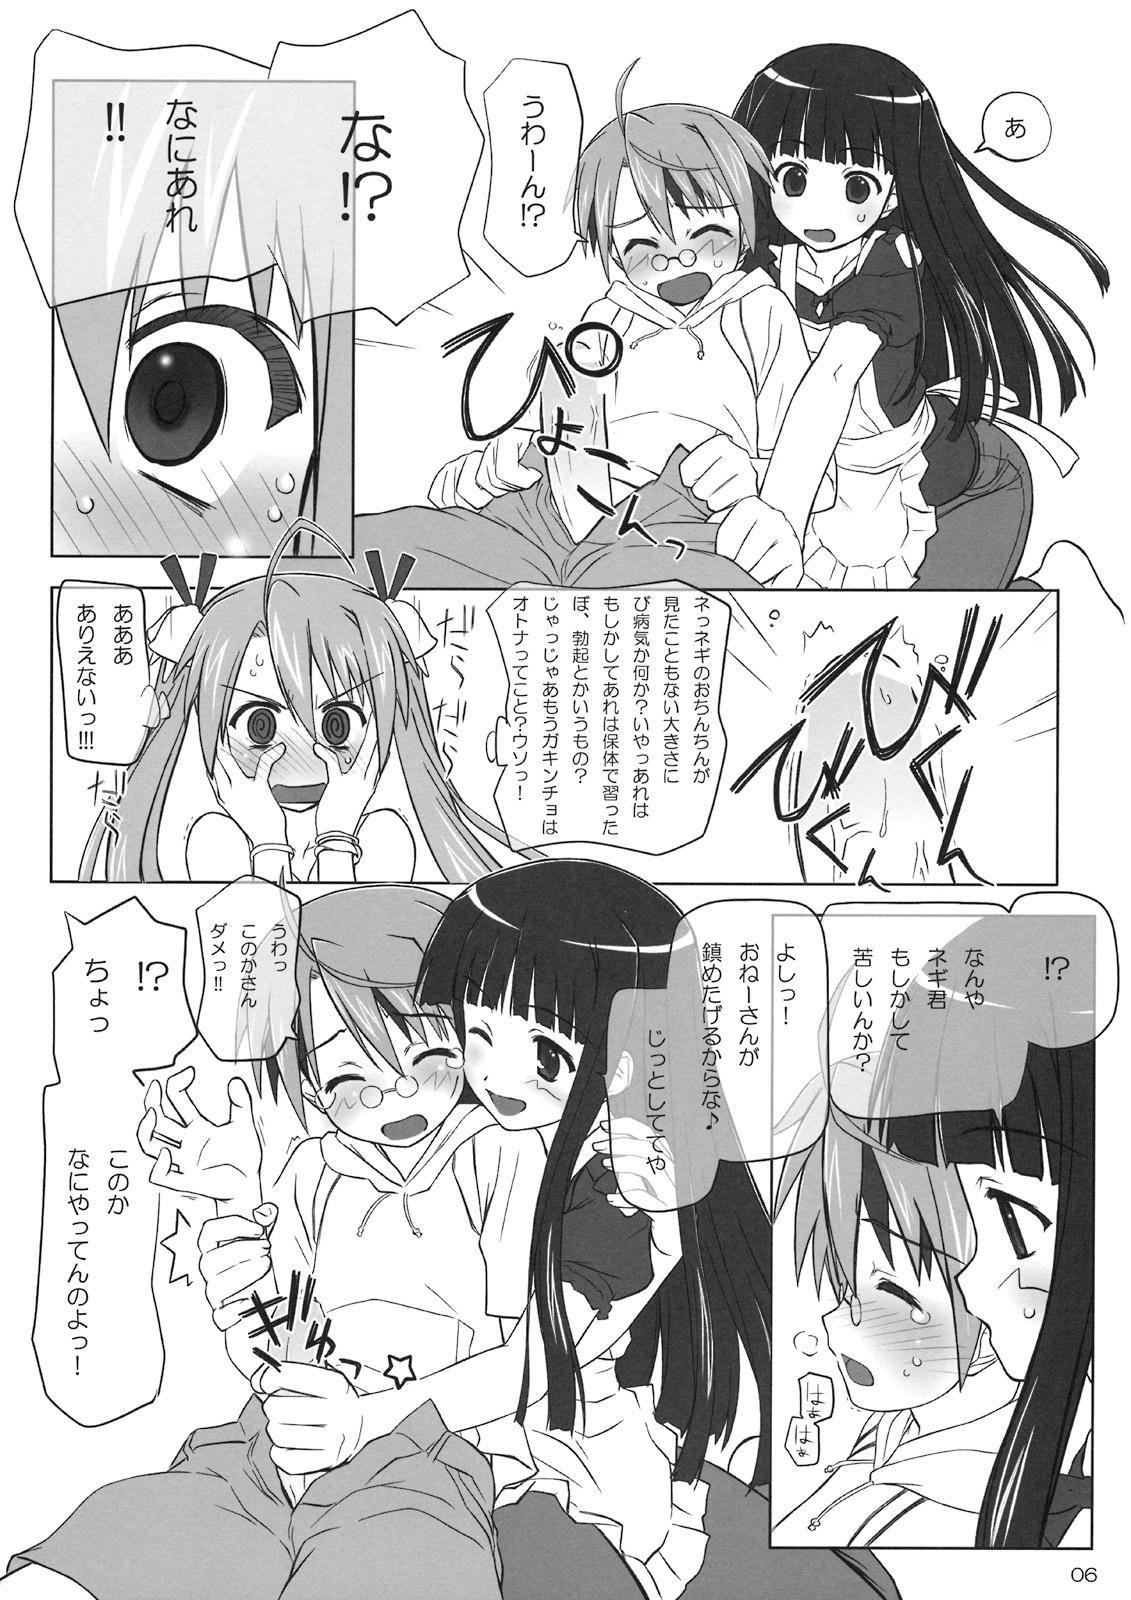 Stepfather Dear My Little Witches 2nd - Mahou sensei negima Gay Bukkakeboy - Page 5